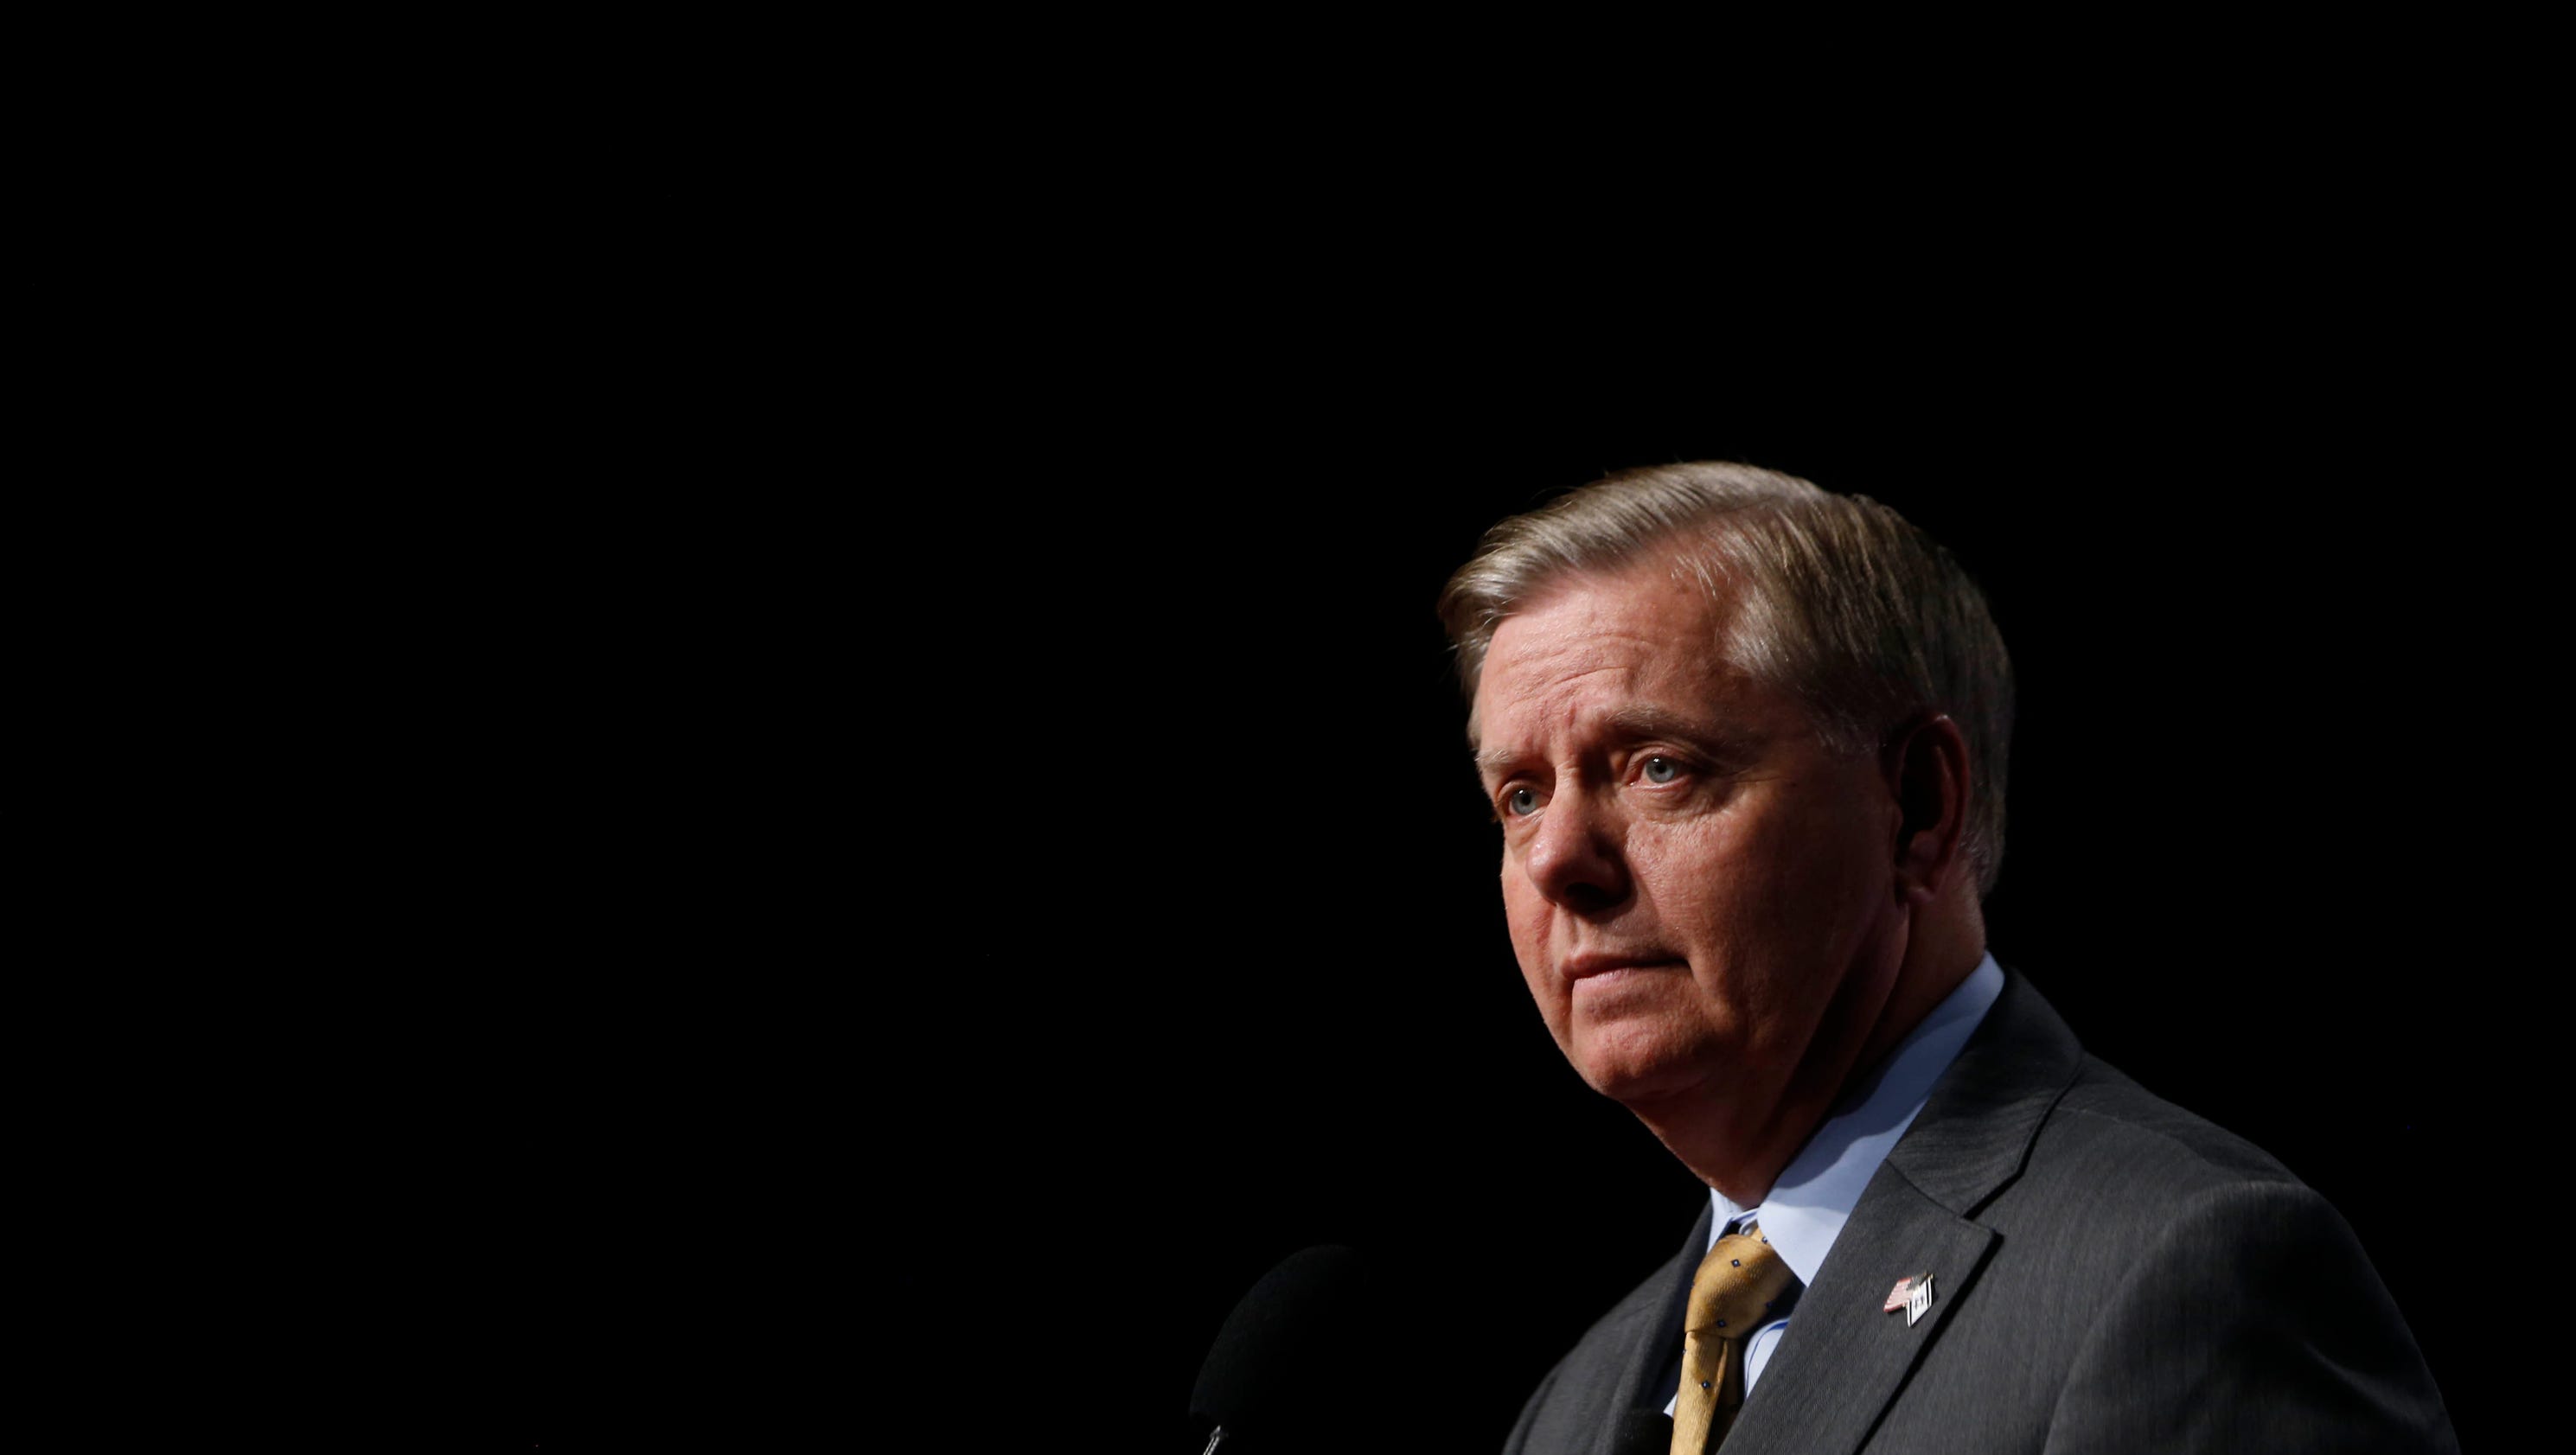 Lindsey Graham drops out of presidential race